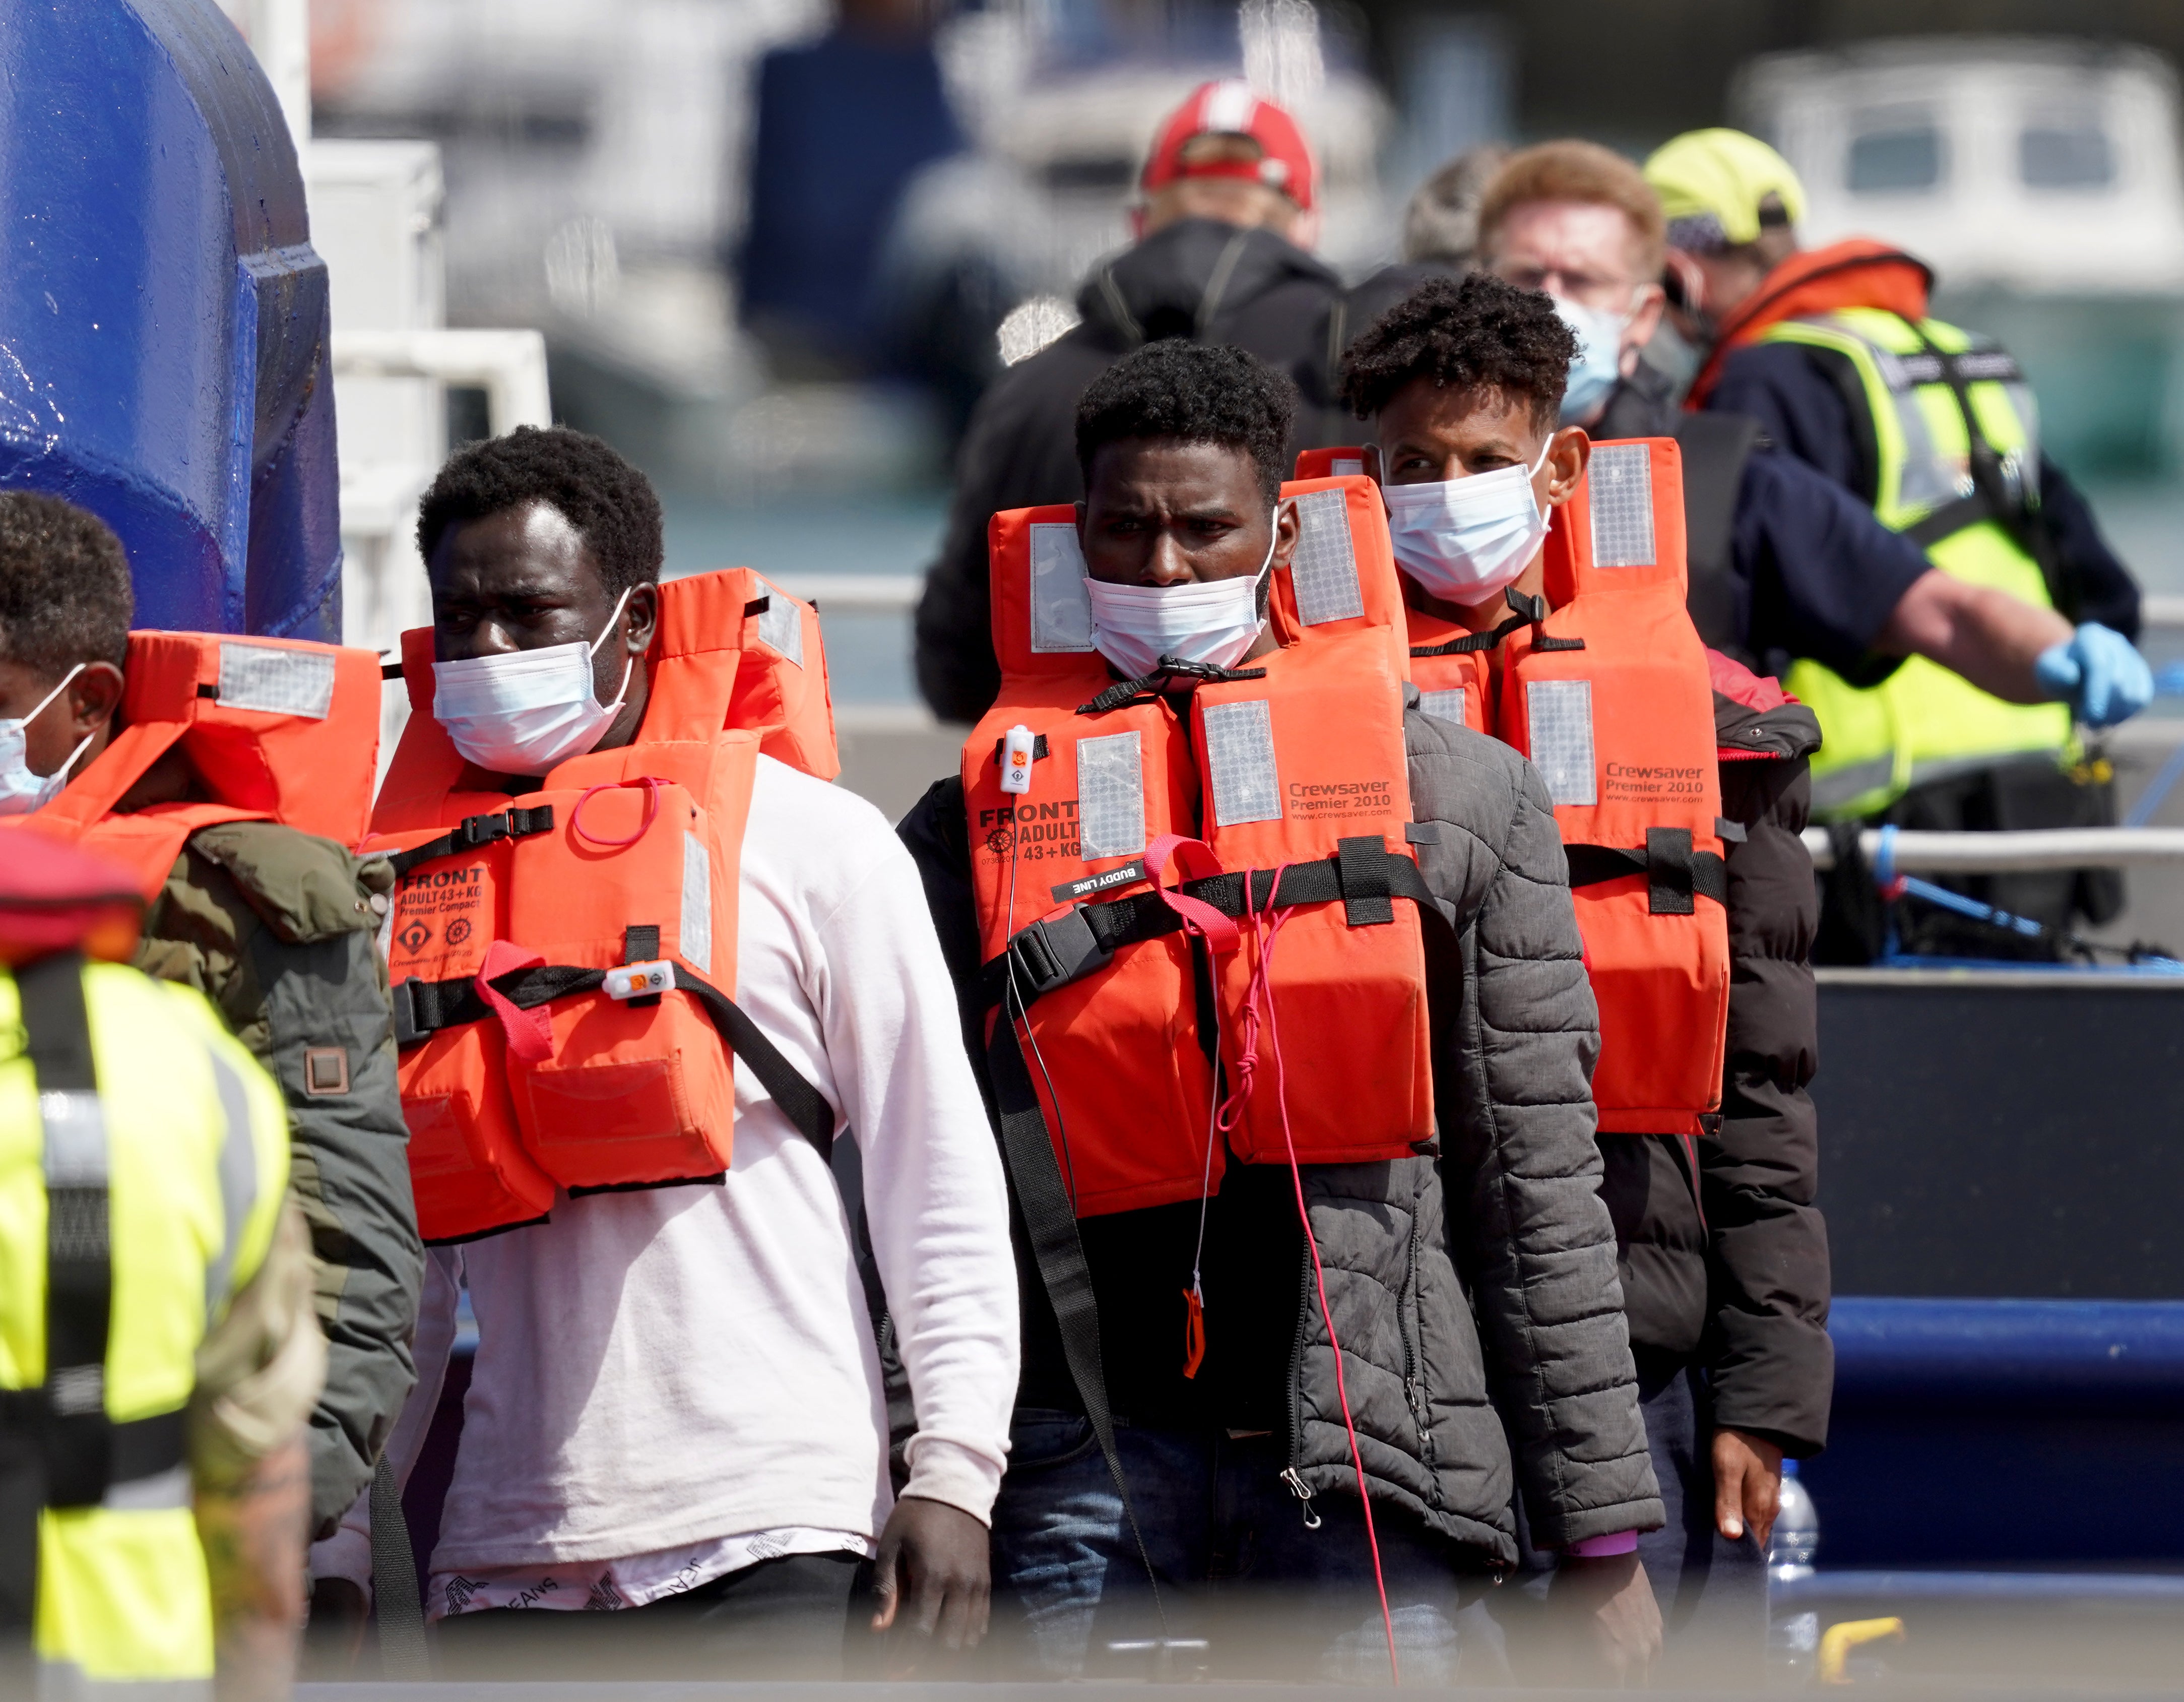 More than 3,000 migrants crossed the Channel to the UK in June – the highest monthly total this year